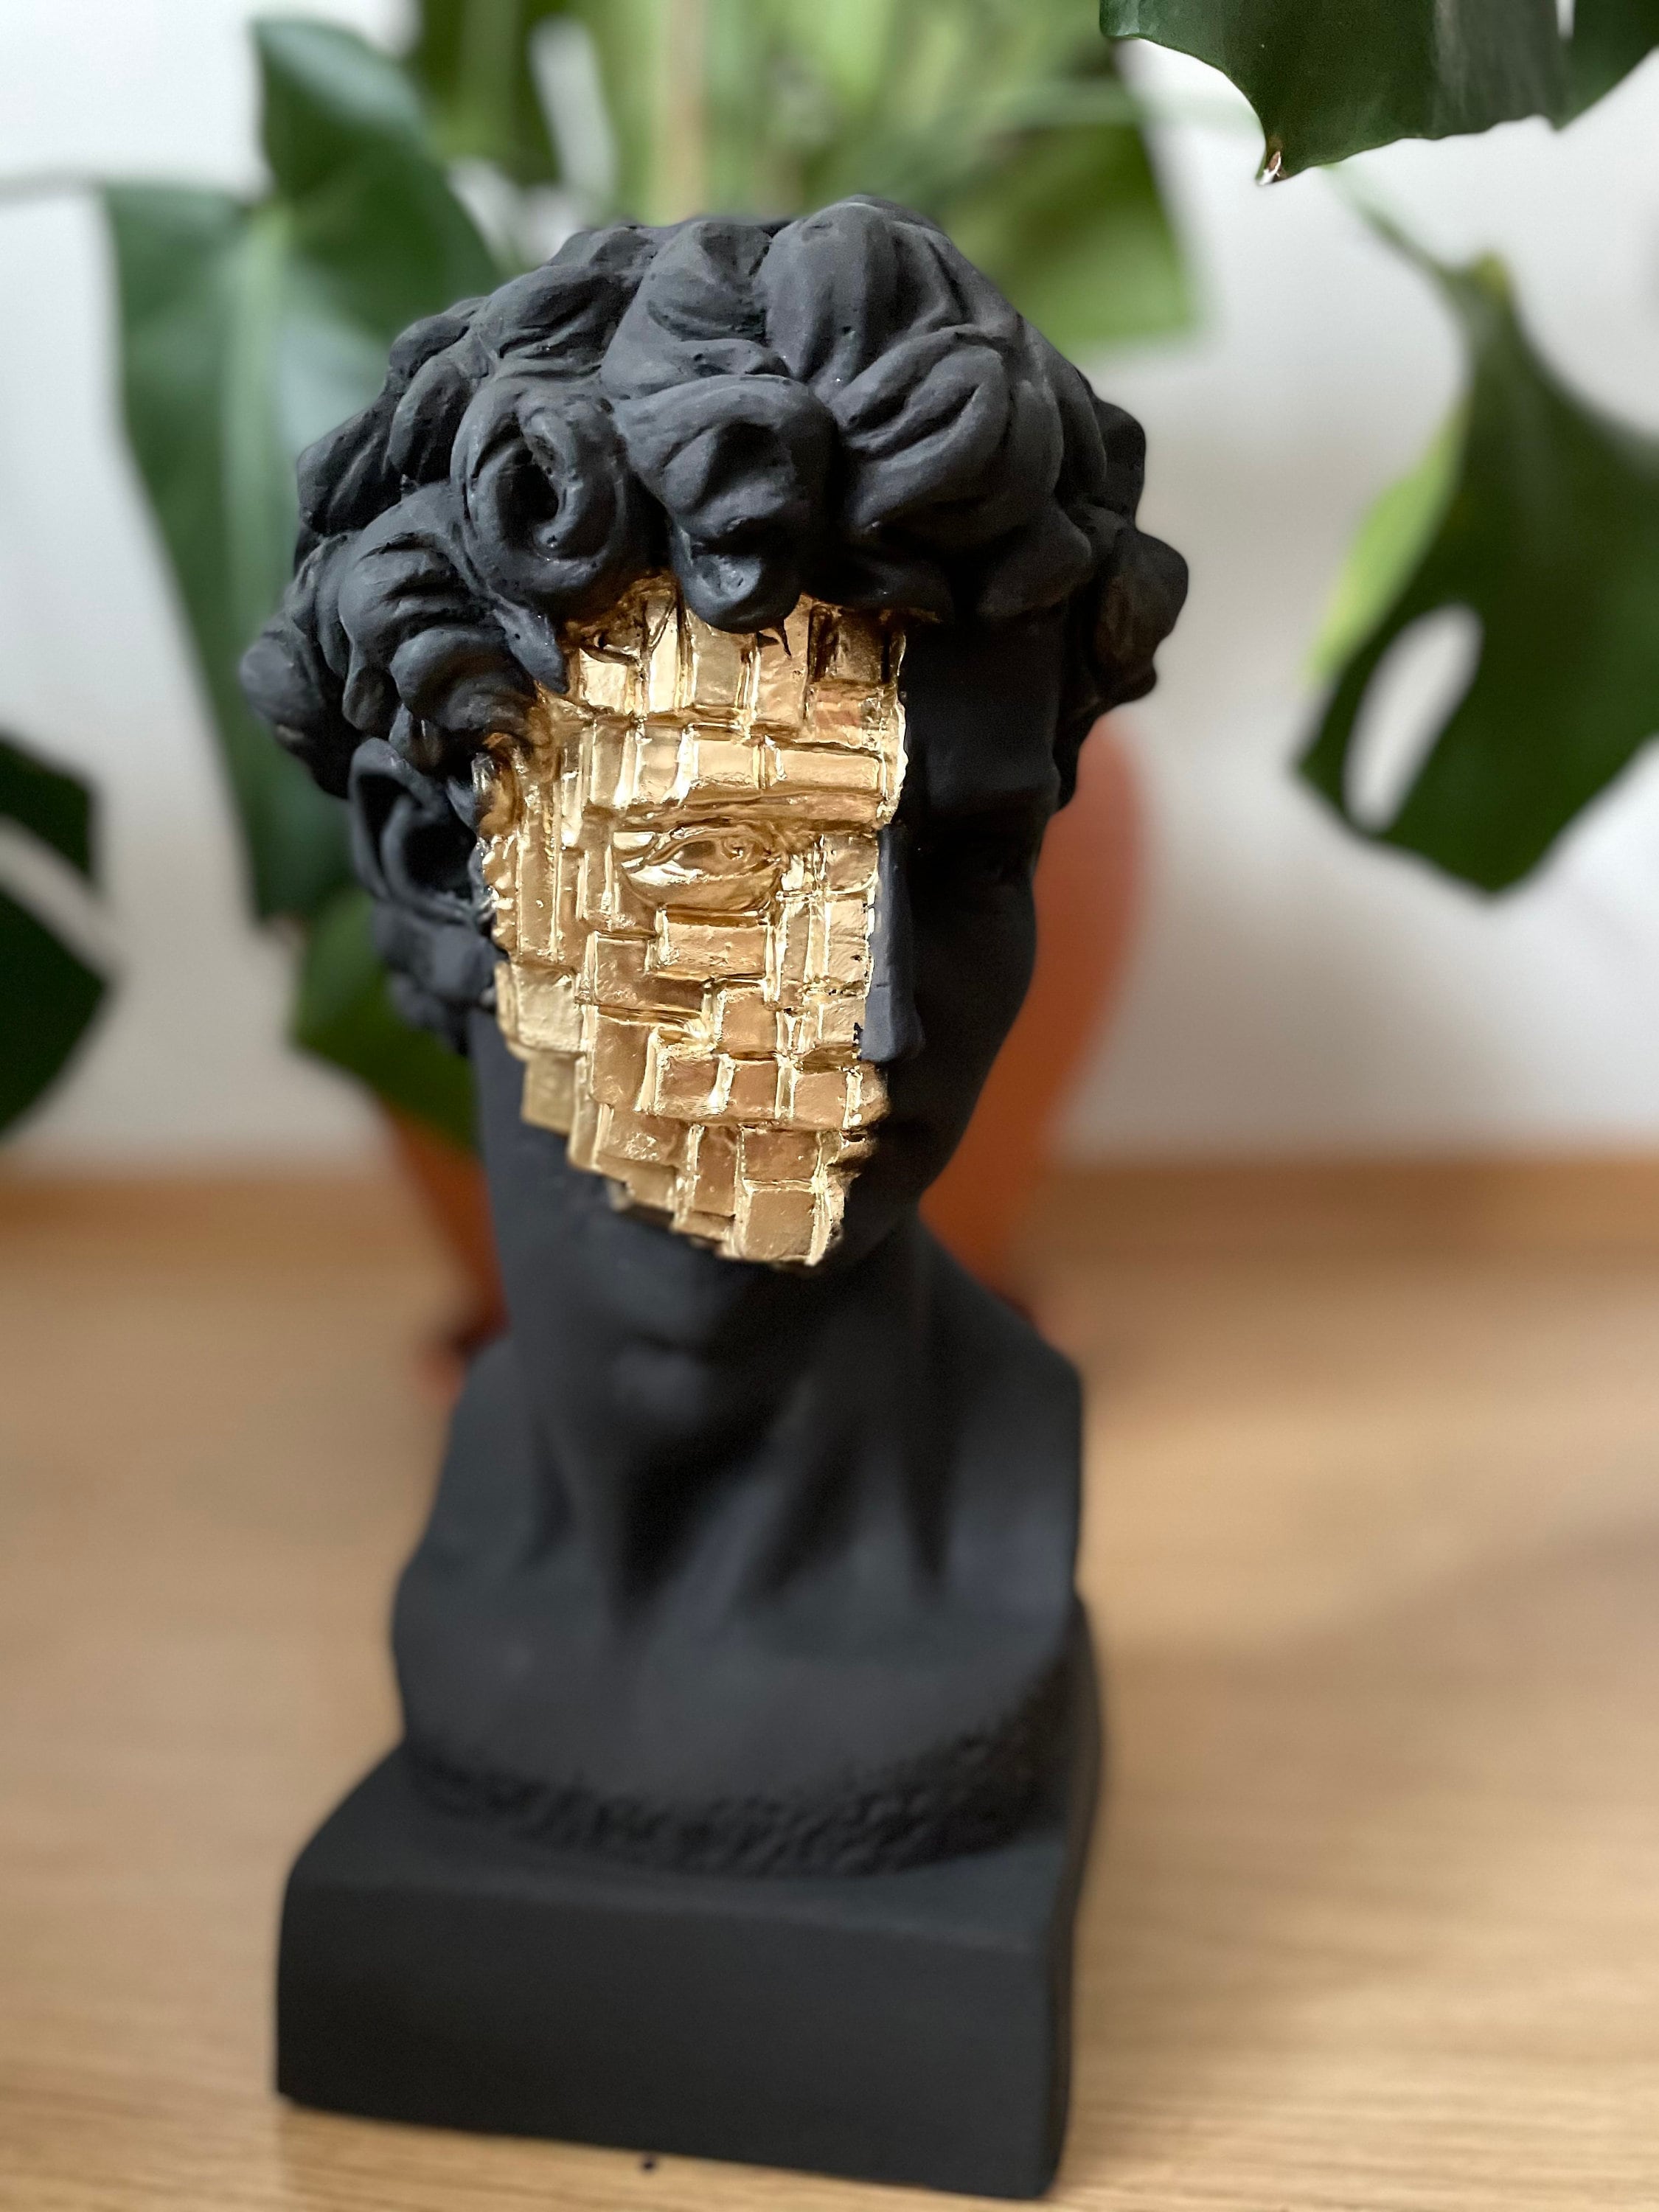 Timeless Opulence: Large David Bust Sculpture in Black and Gold